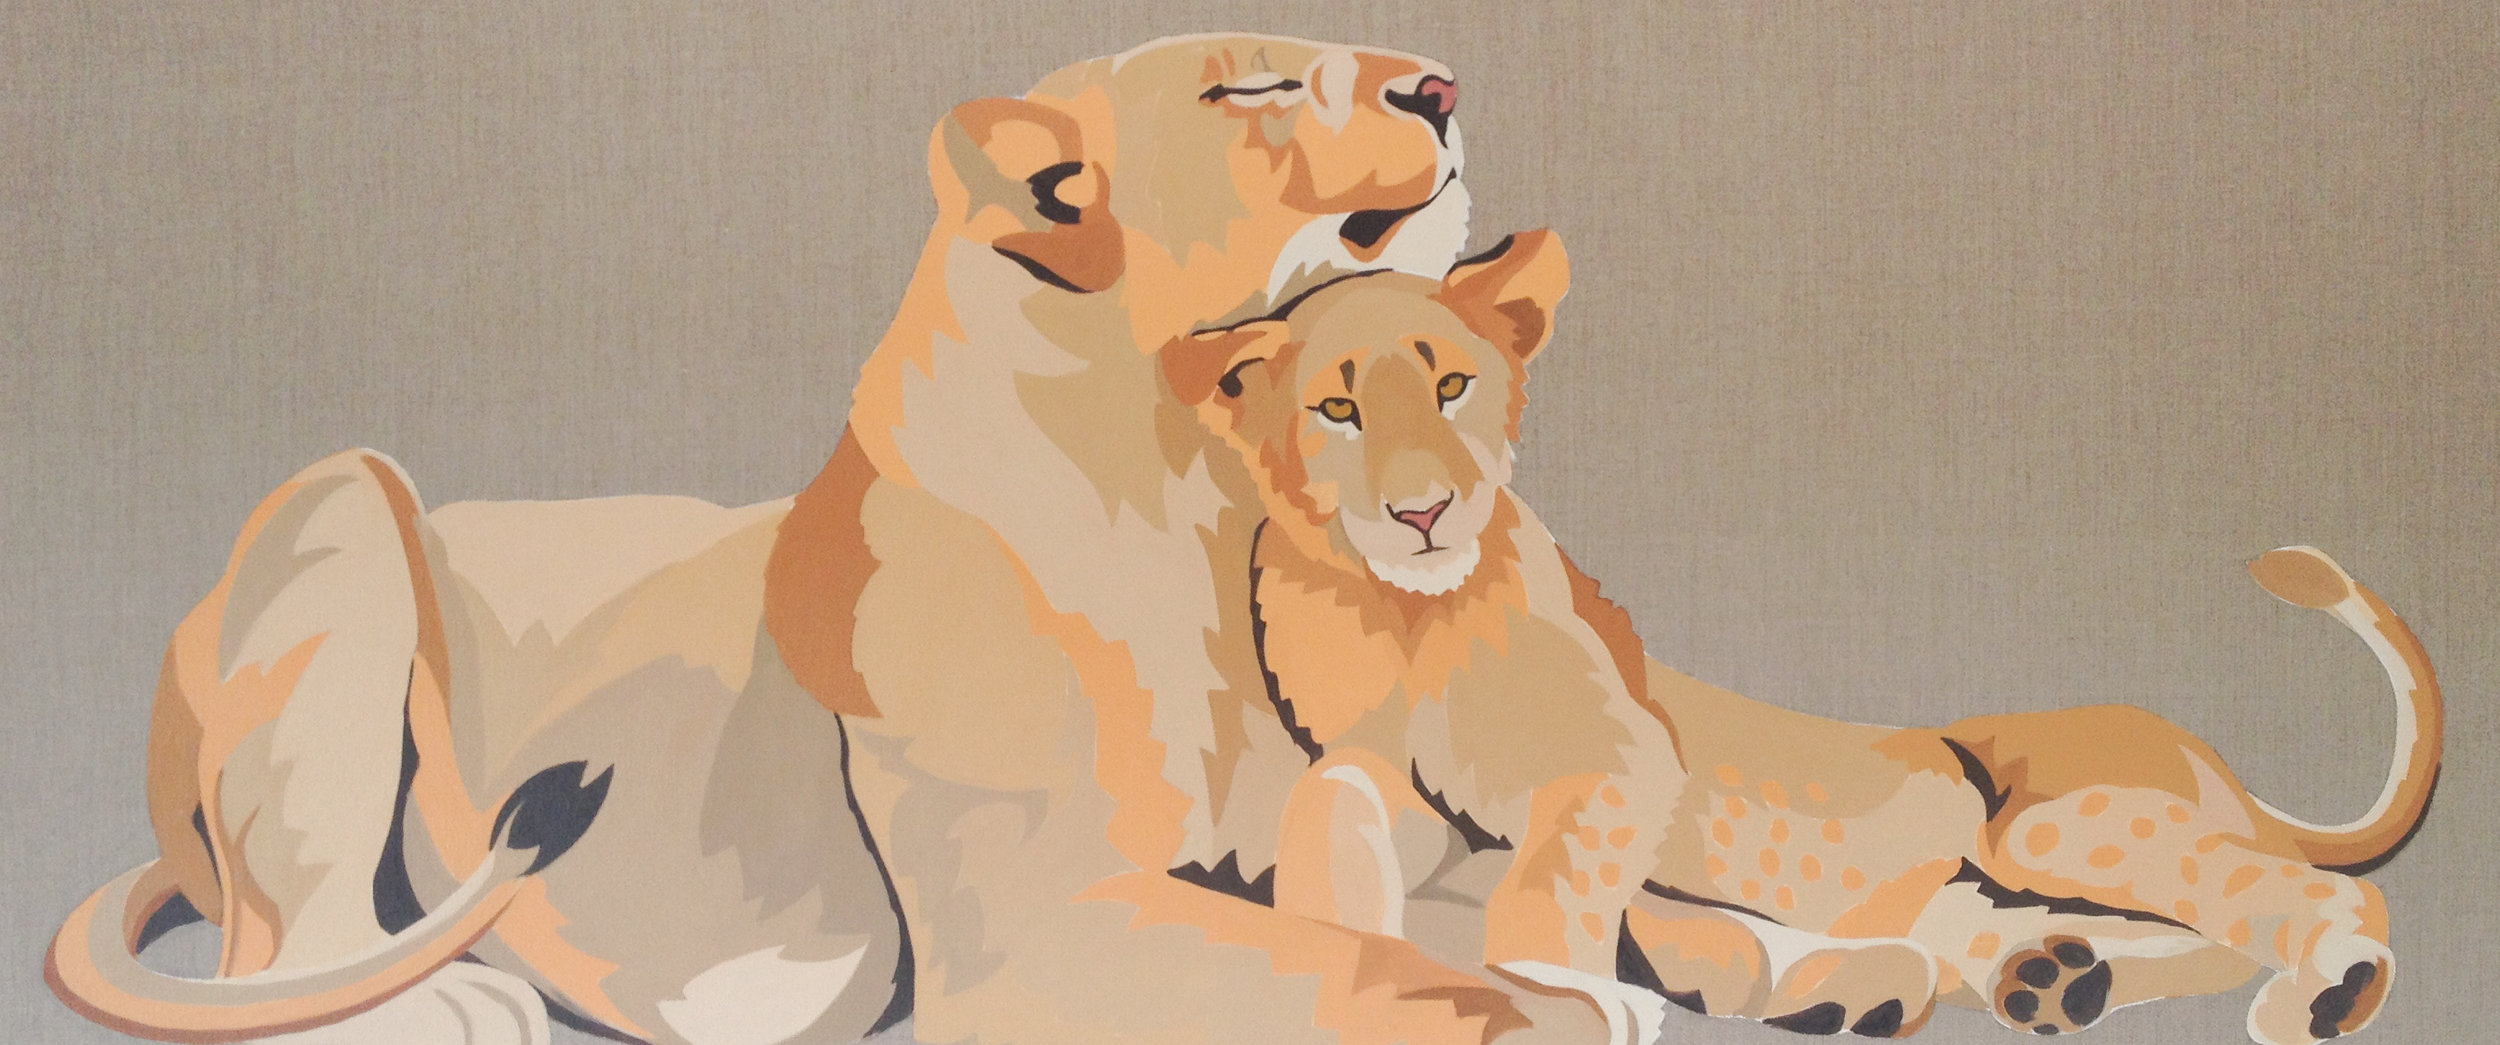 Lion and Cub Painting 1-6.jpg